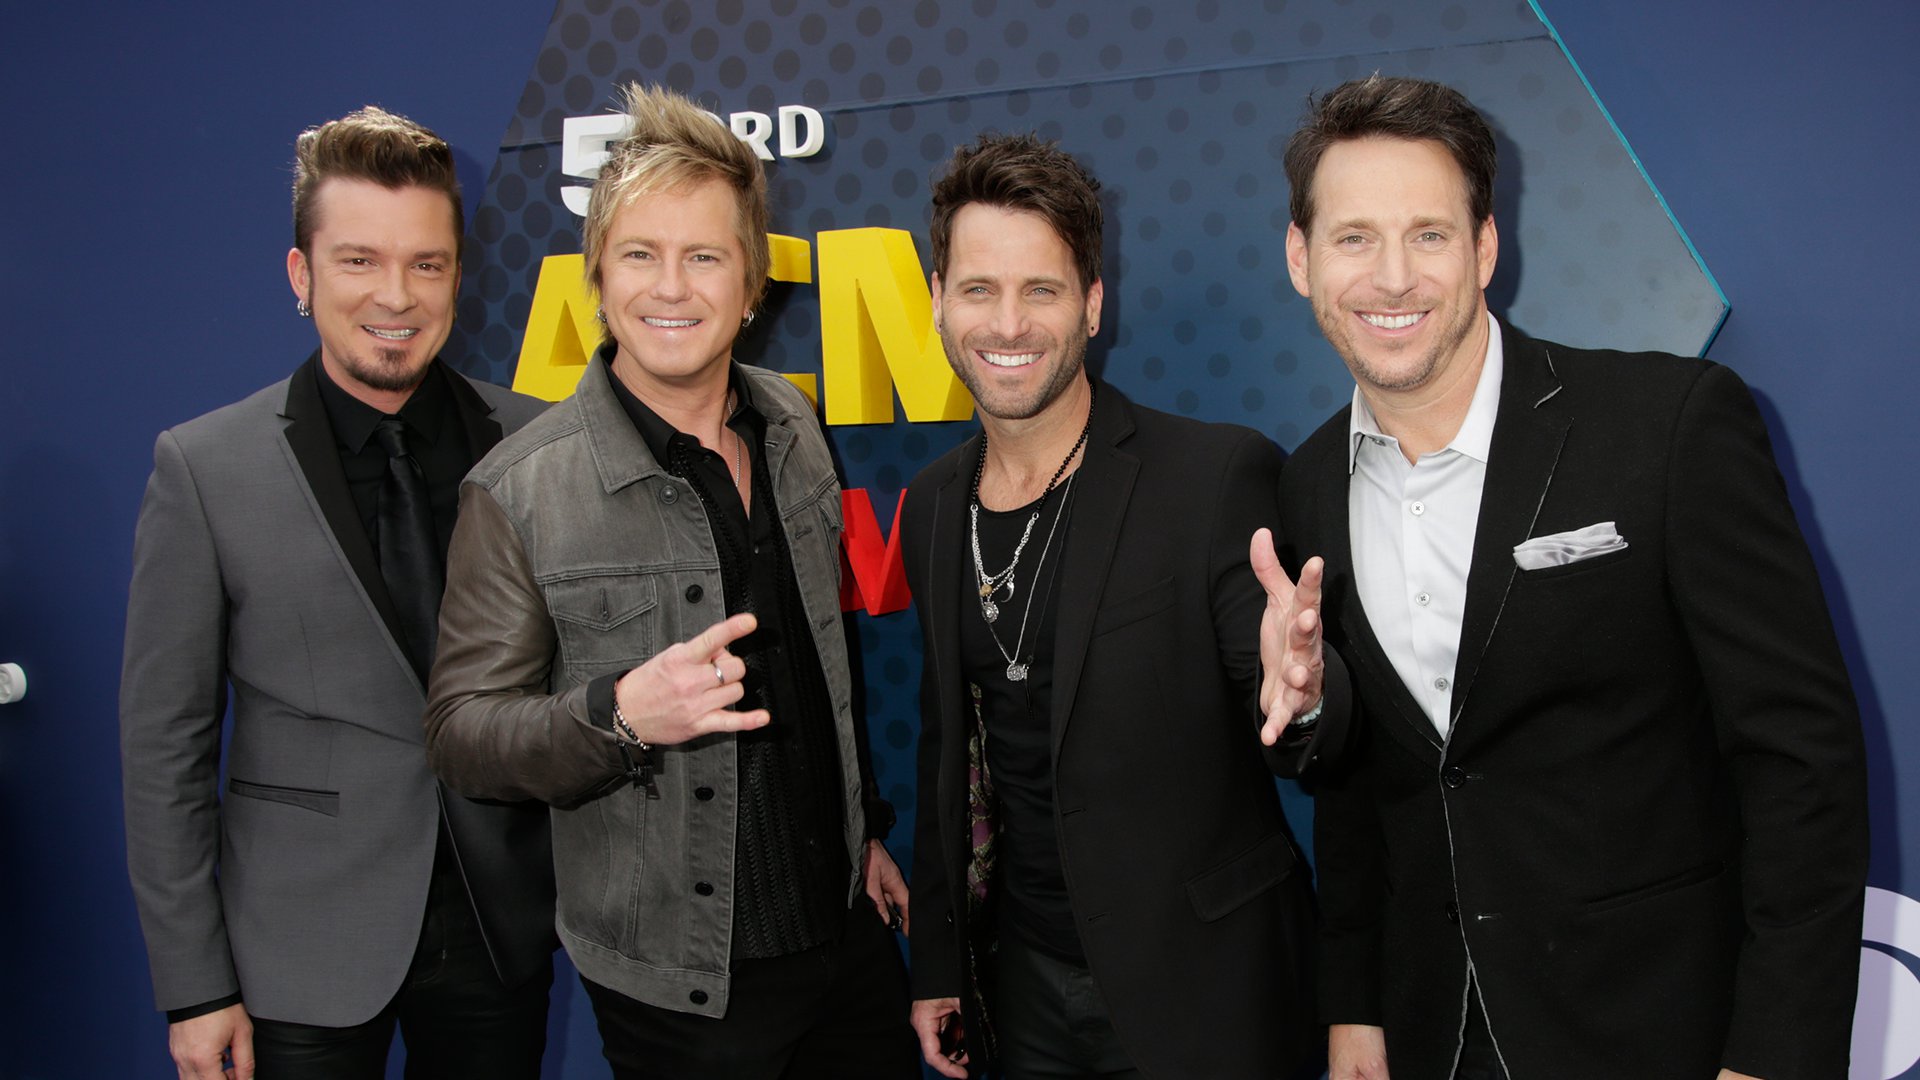 The members of Parmalee wear a variety of different textures on the red carpet, including velvet and denim.